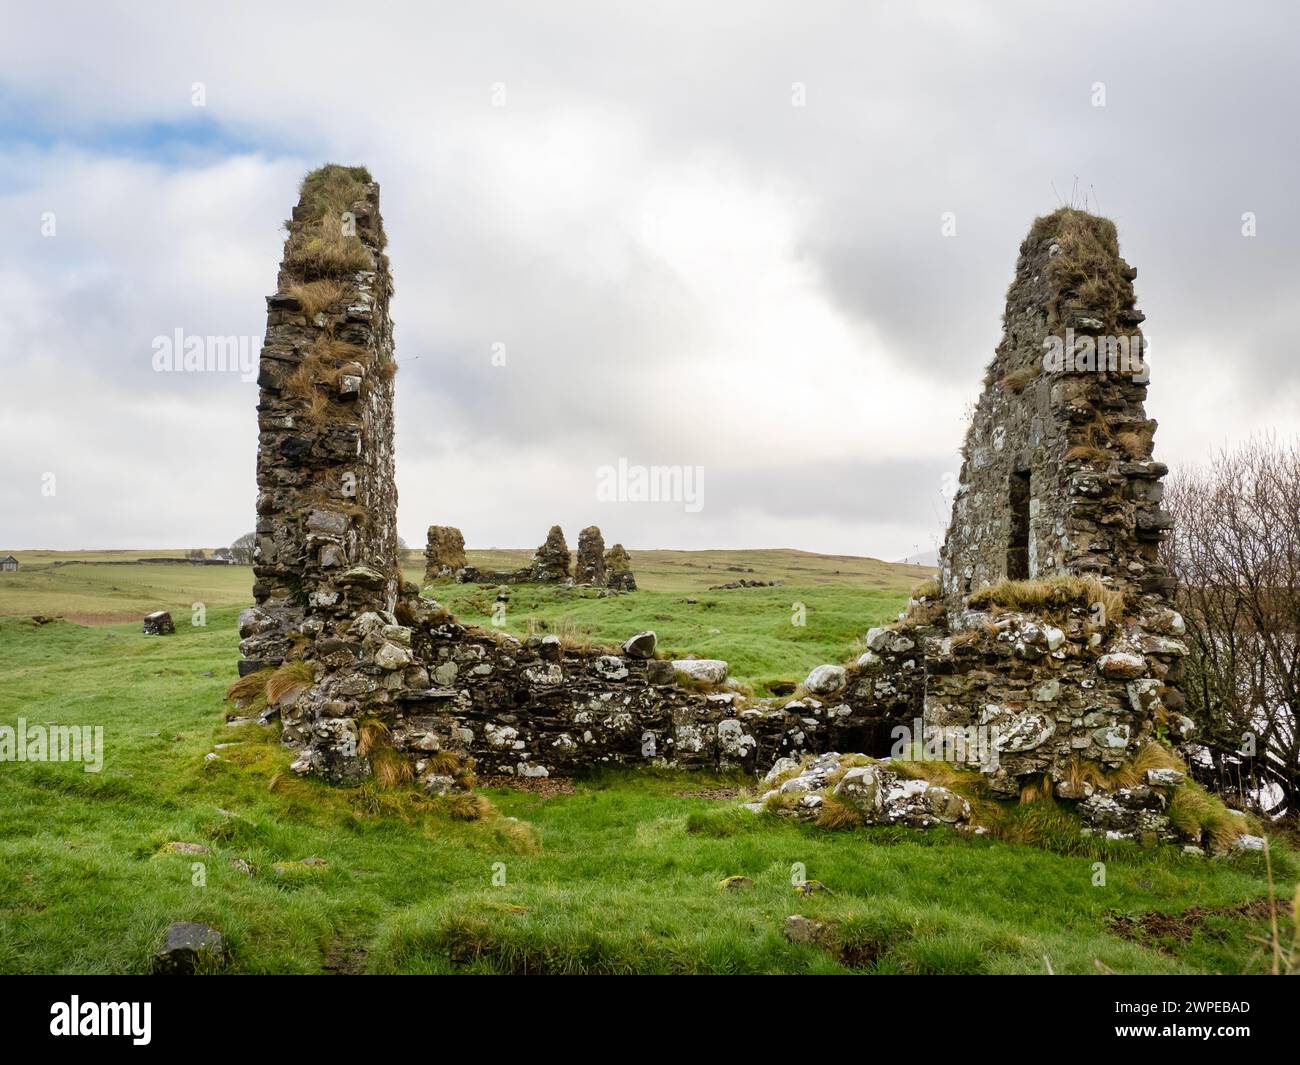 Ancient building remains at Loch Finlaggan on the island that was the seat of the Lords of the Isles, Islay, Scotland, UK. Stock Photo